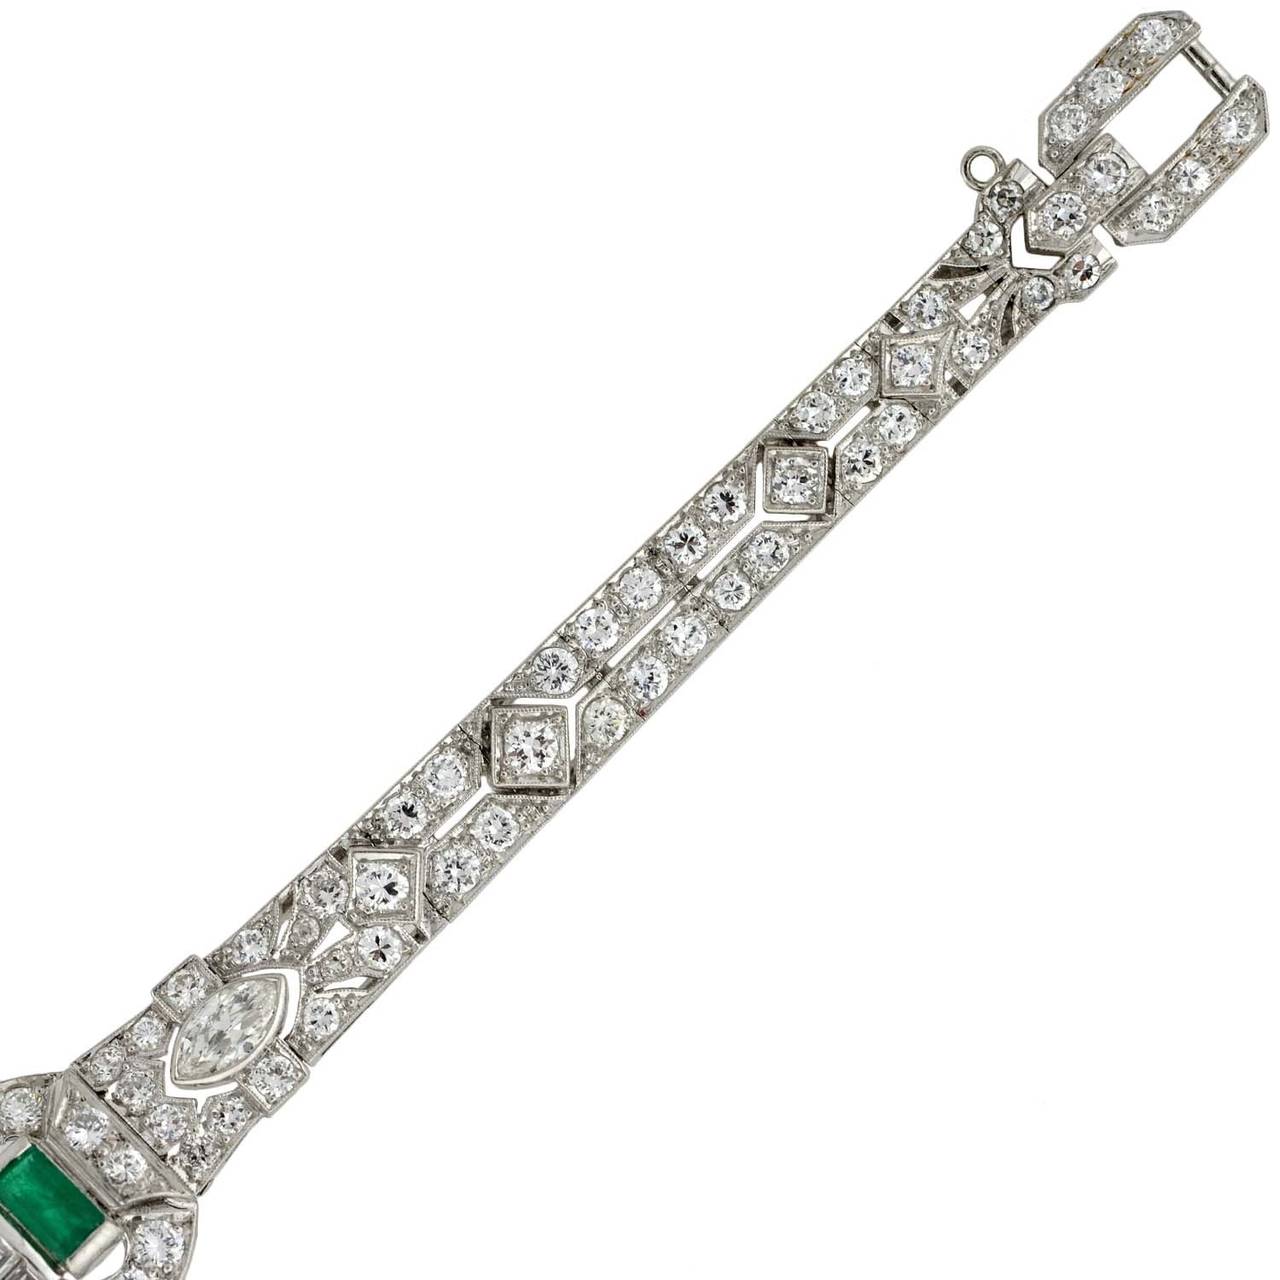 An absolutely exquisite diamond and emerald encrusted bracelet from the late Art Deco (ca1930) era! This luxurious piece is made of platinum and features over 6.00 carats of diamonds and 3 luscious emeralds. The belly front line bracelet is